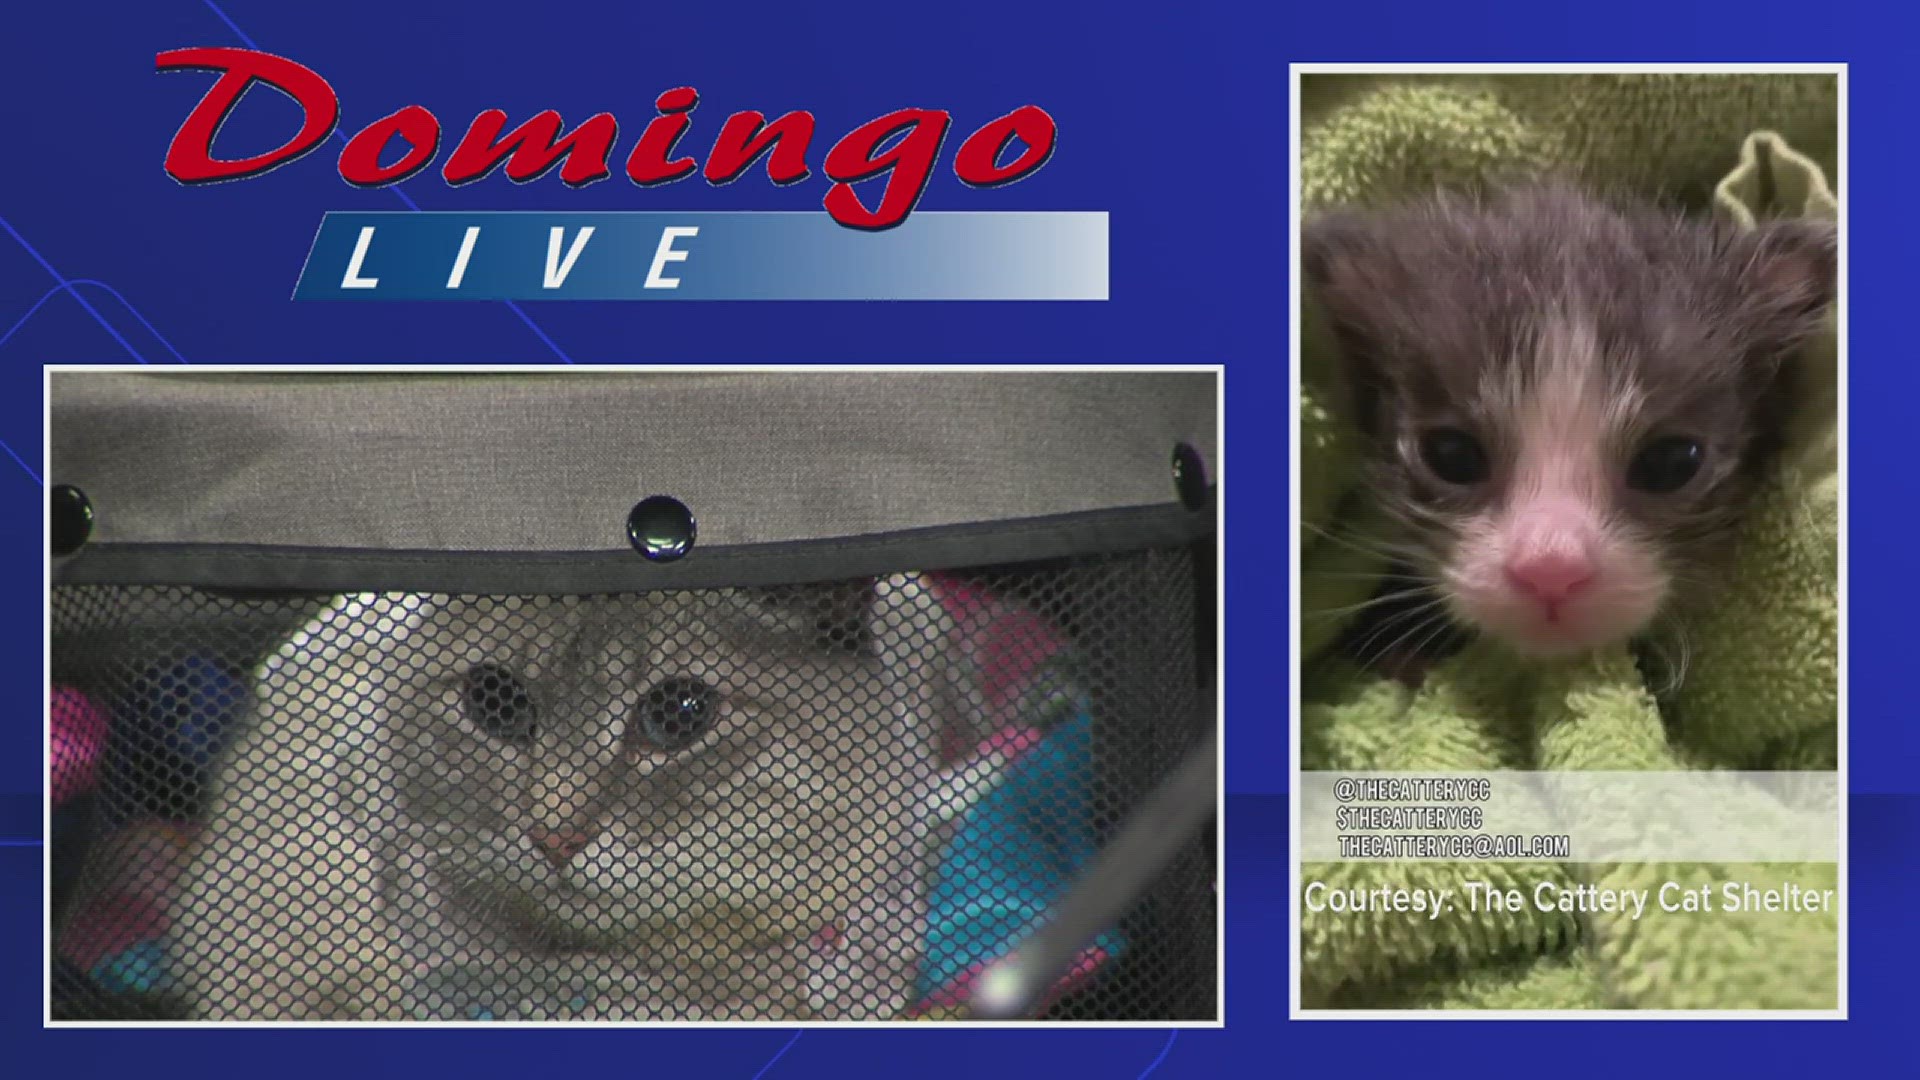 Local cele-purr-ty Princess Cecily and The Cattery reps Crystal and Gilbert joined us on Domingo Live to discuss kitten season and how you can help the cat shelter.